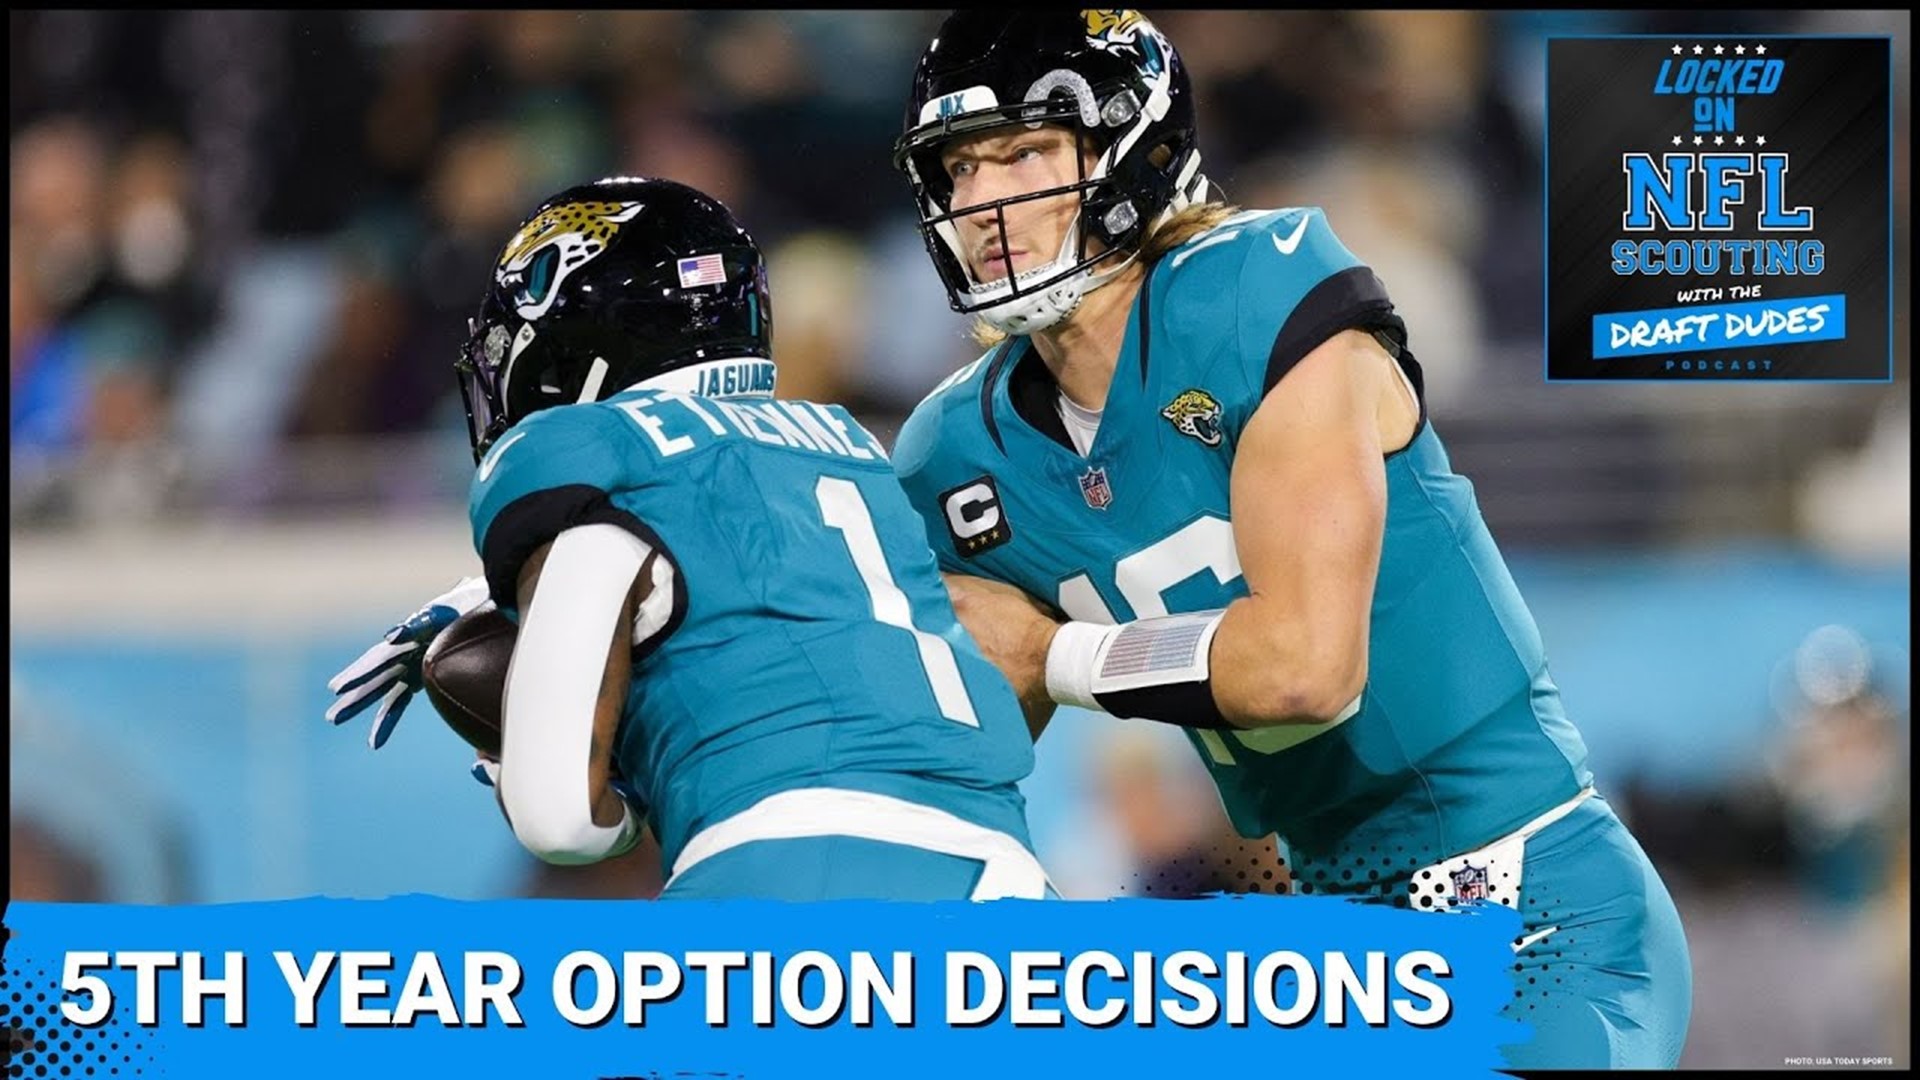 Examining the 5th year option decisions NFL teams must make soon for